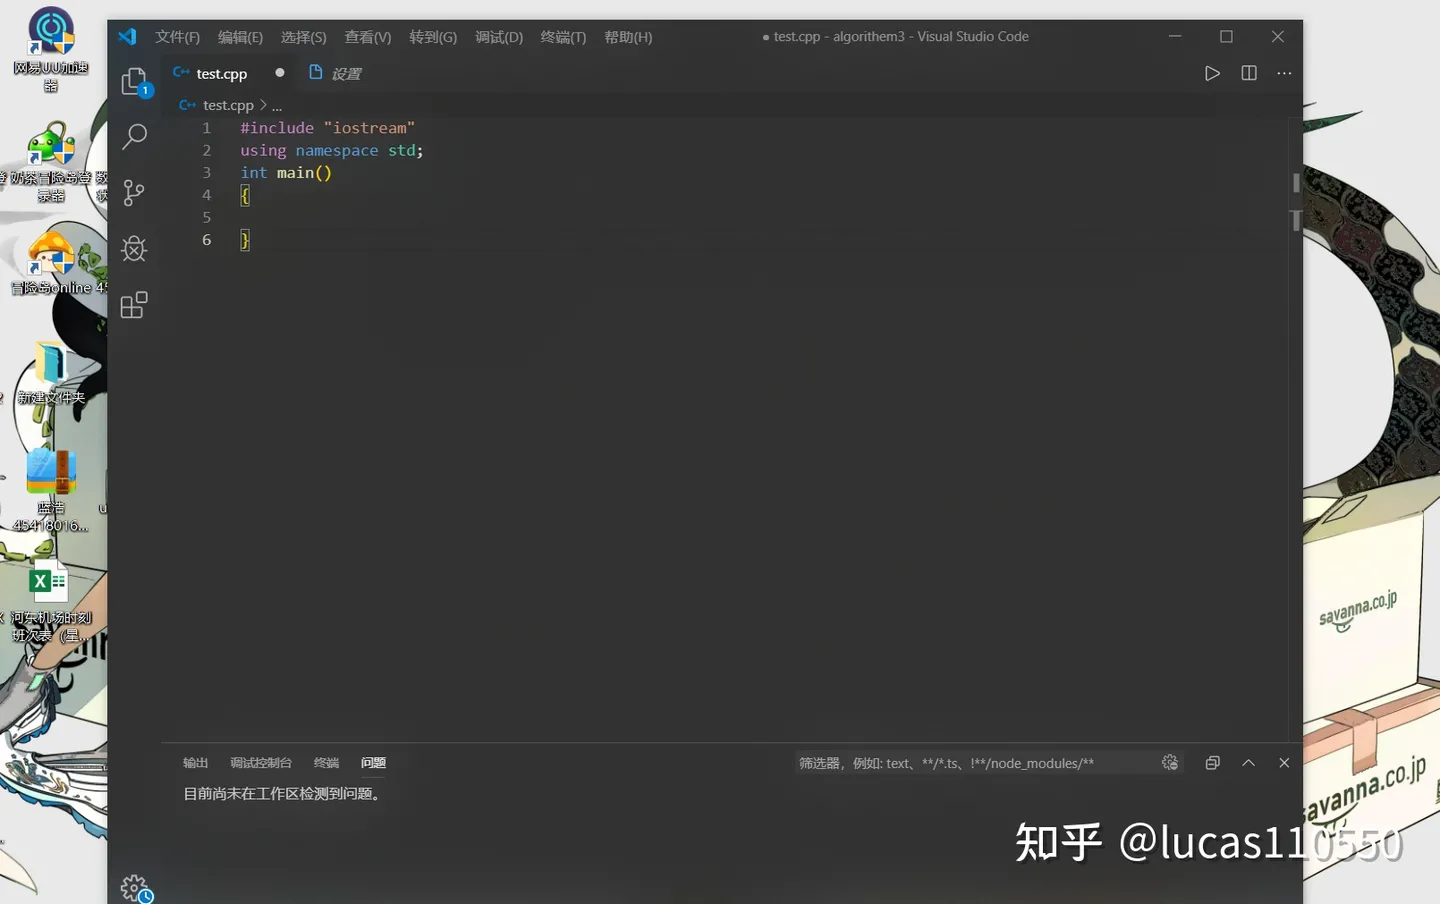 NaokiLH's screenshot of his computer desktop in a GitHub issue